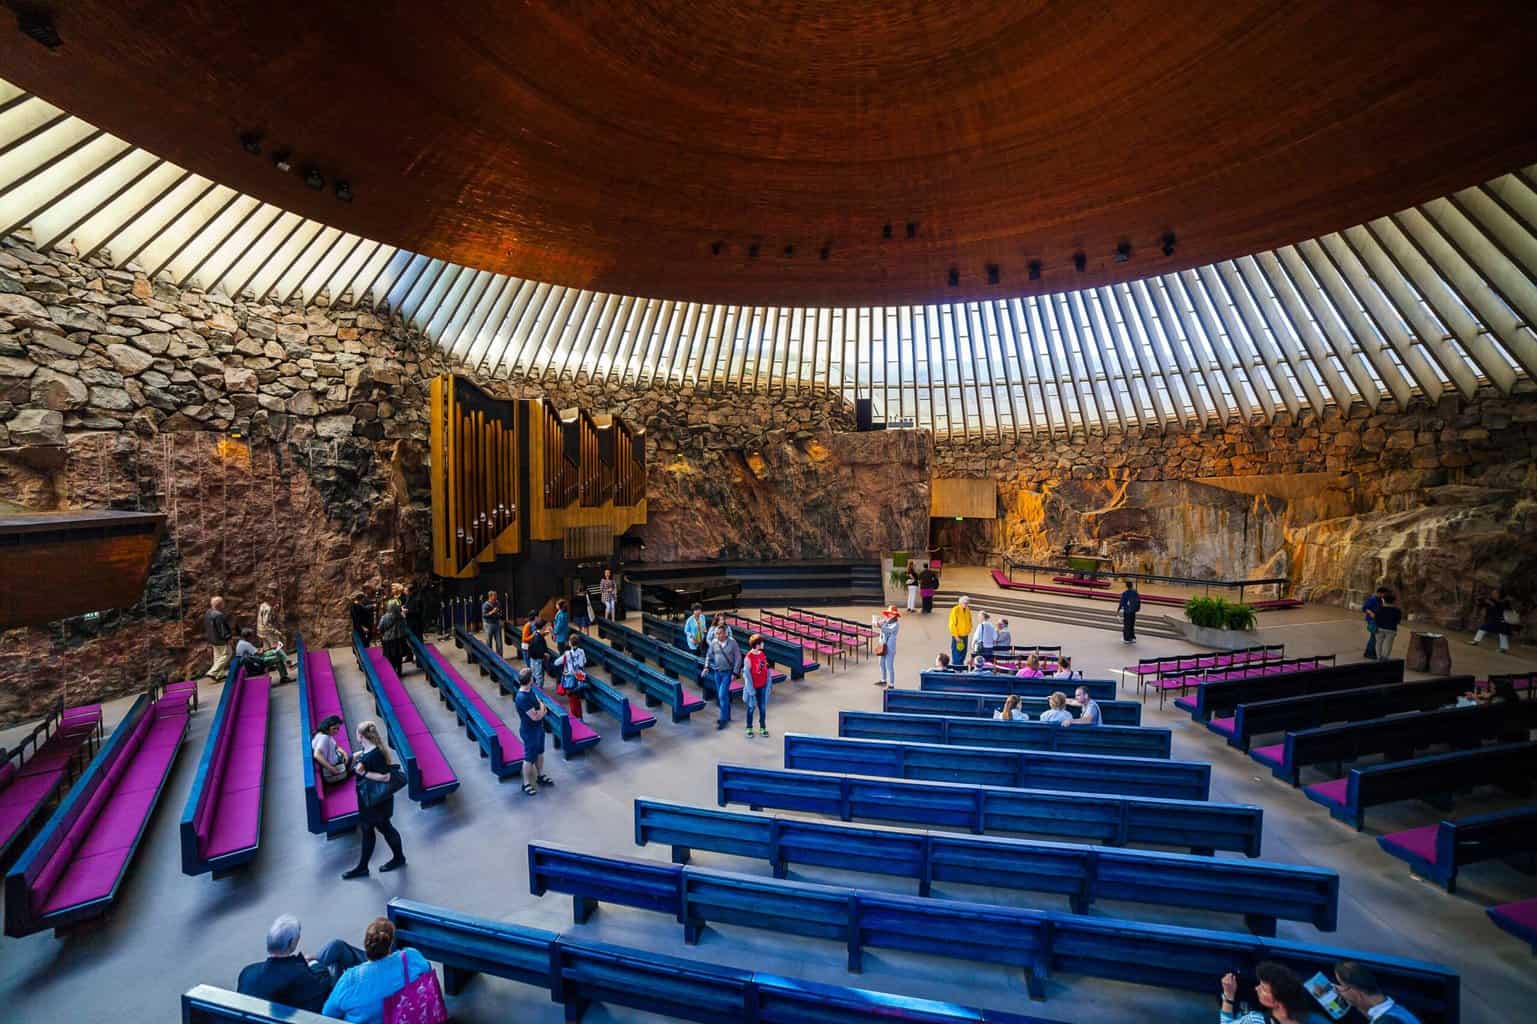 Temppeliaukio Church min scaled When talking about the most beautiful places in Finland, of course, the country’s capital Helsinki would be right there on the top of the list. Helsinki has been named the world’s most livable city, and it is easy to see why.